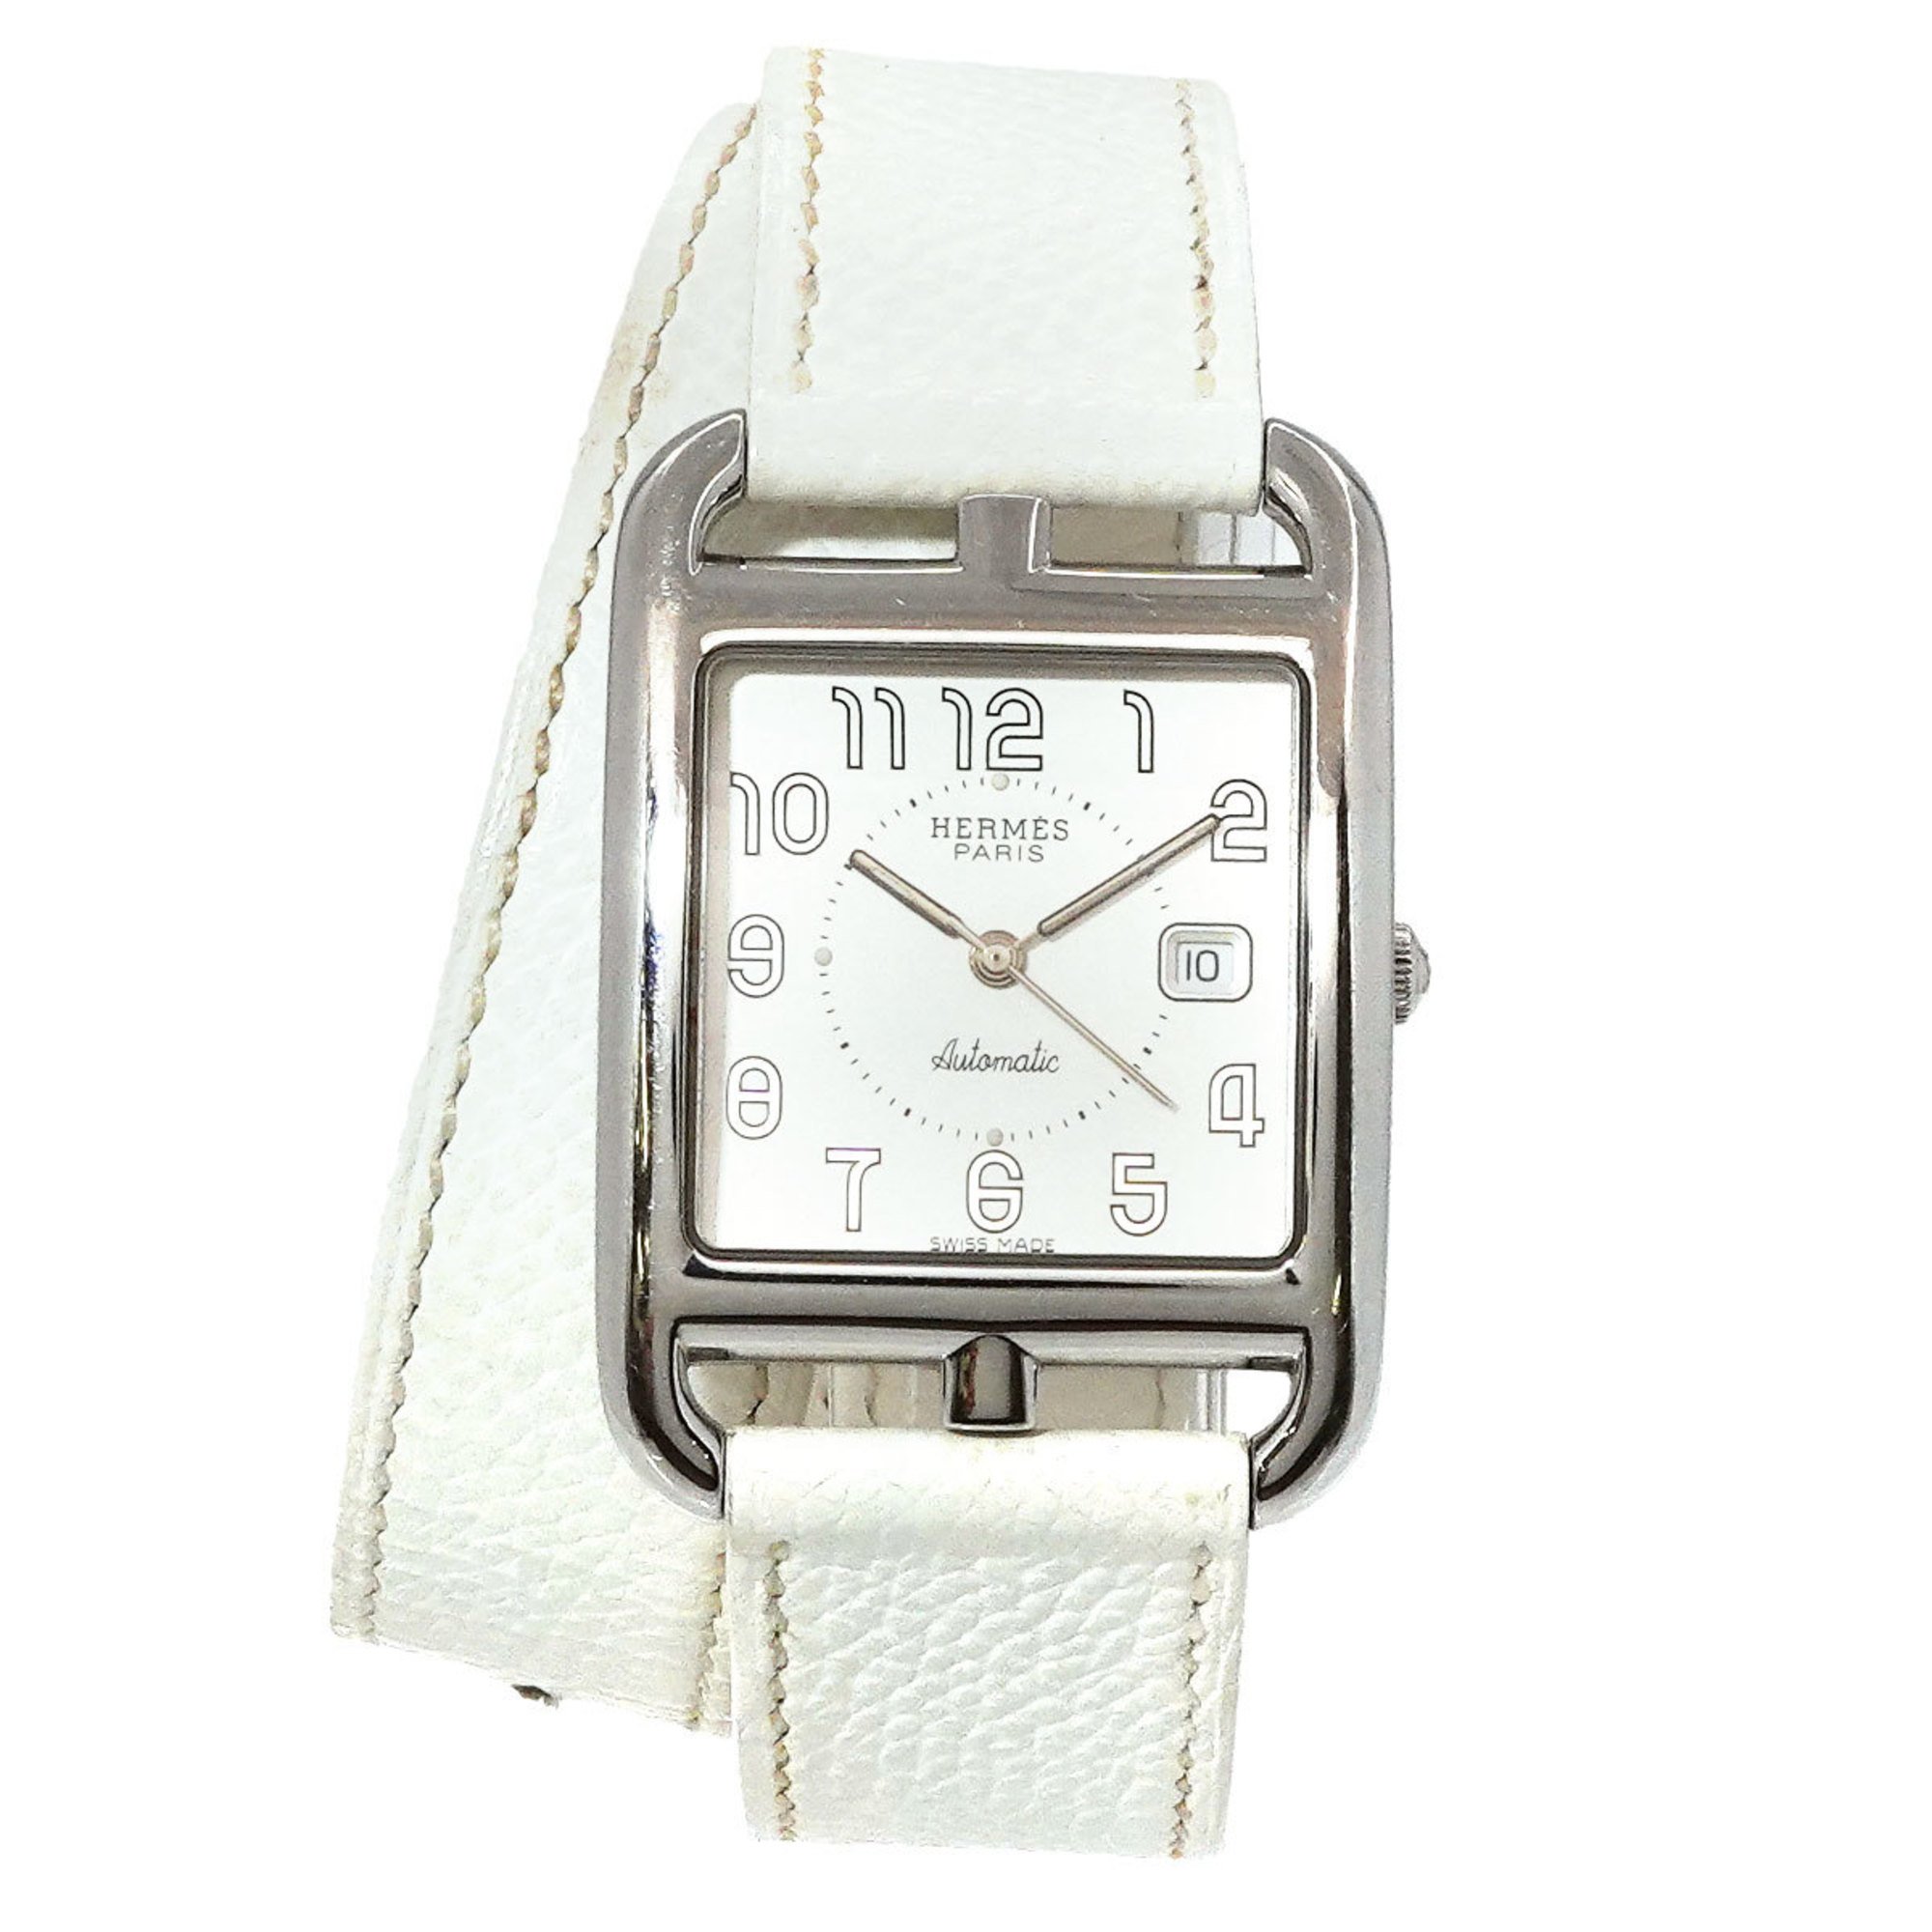 Hermes Cape Cod Double Tour CC1 710 Boys Watch Date Silver Dial Automatic Winding